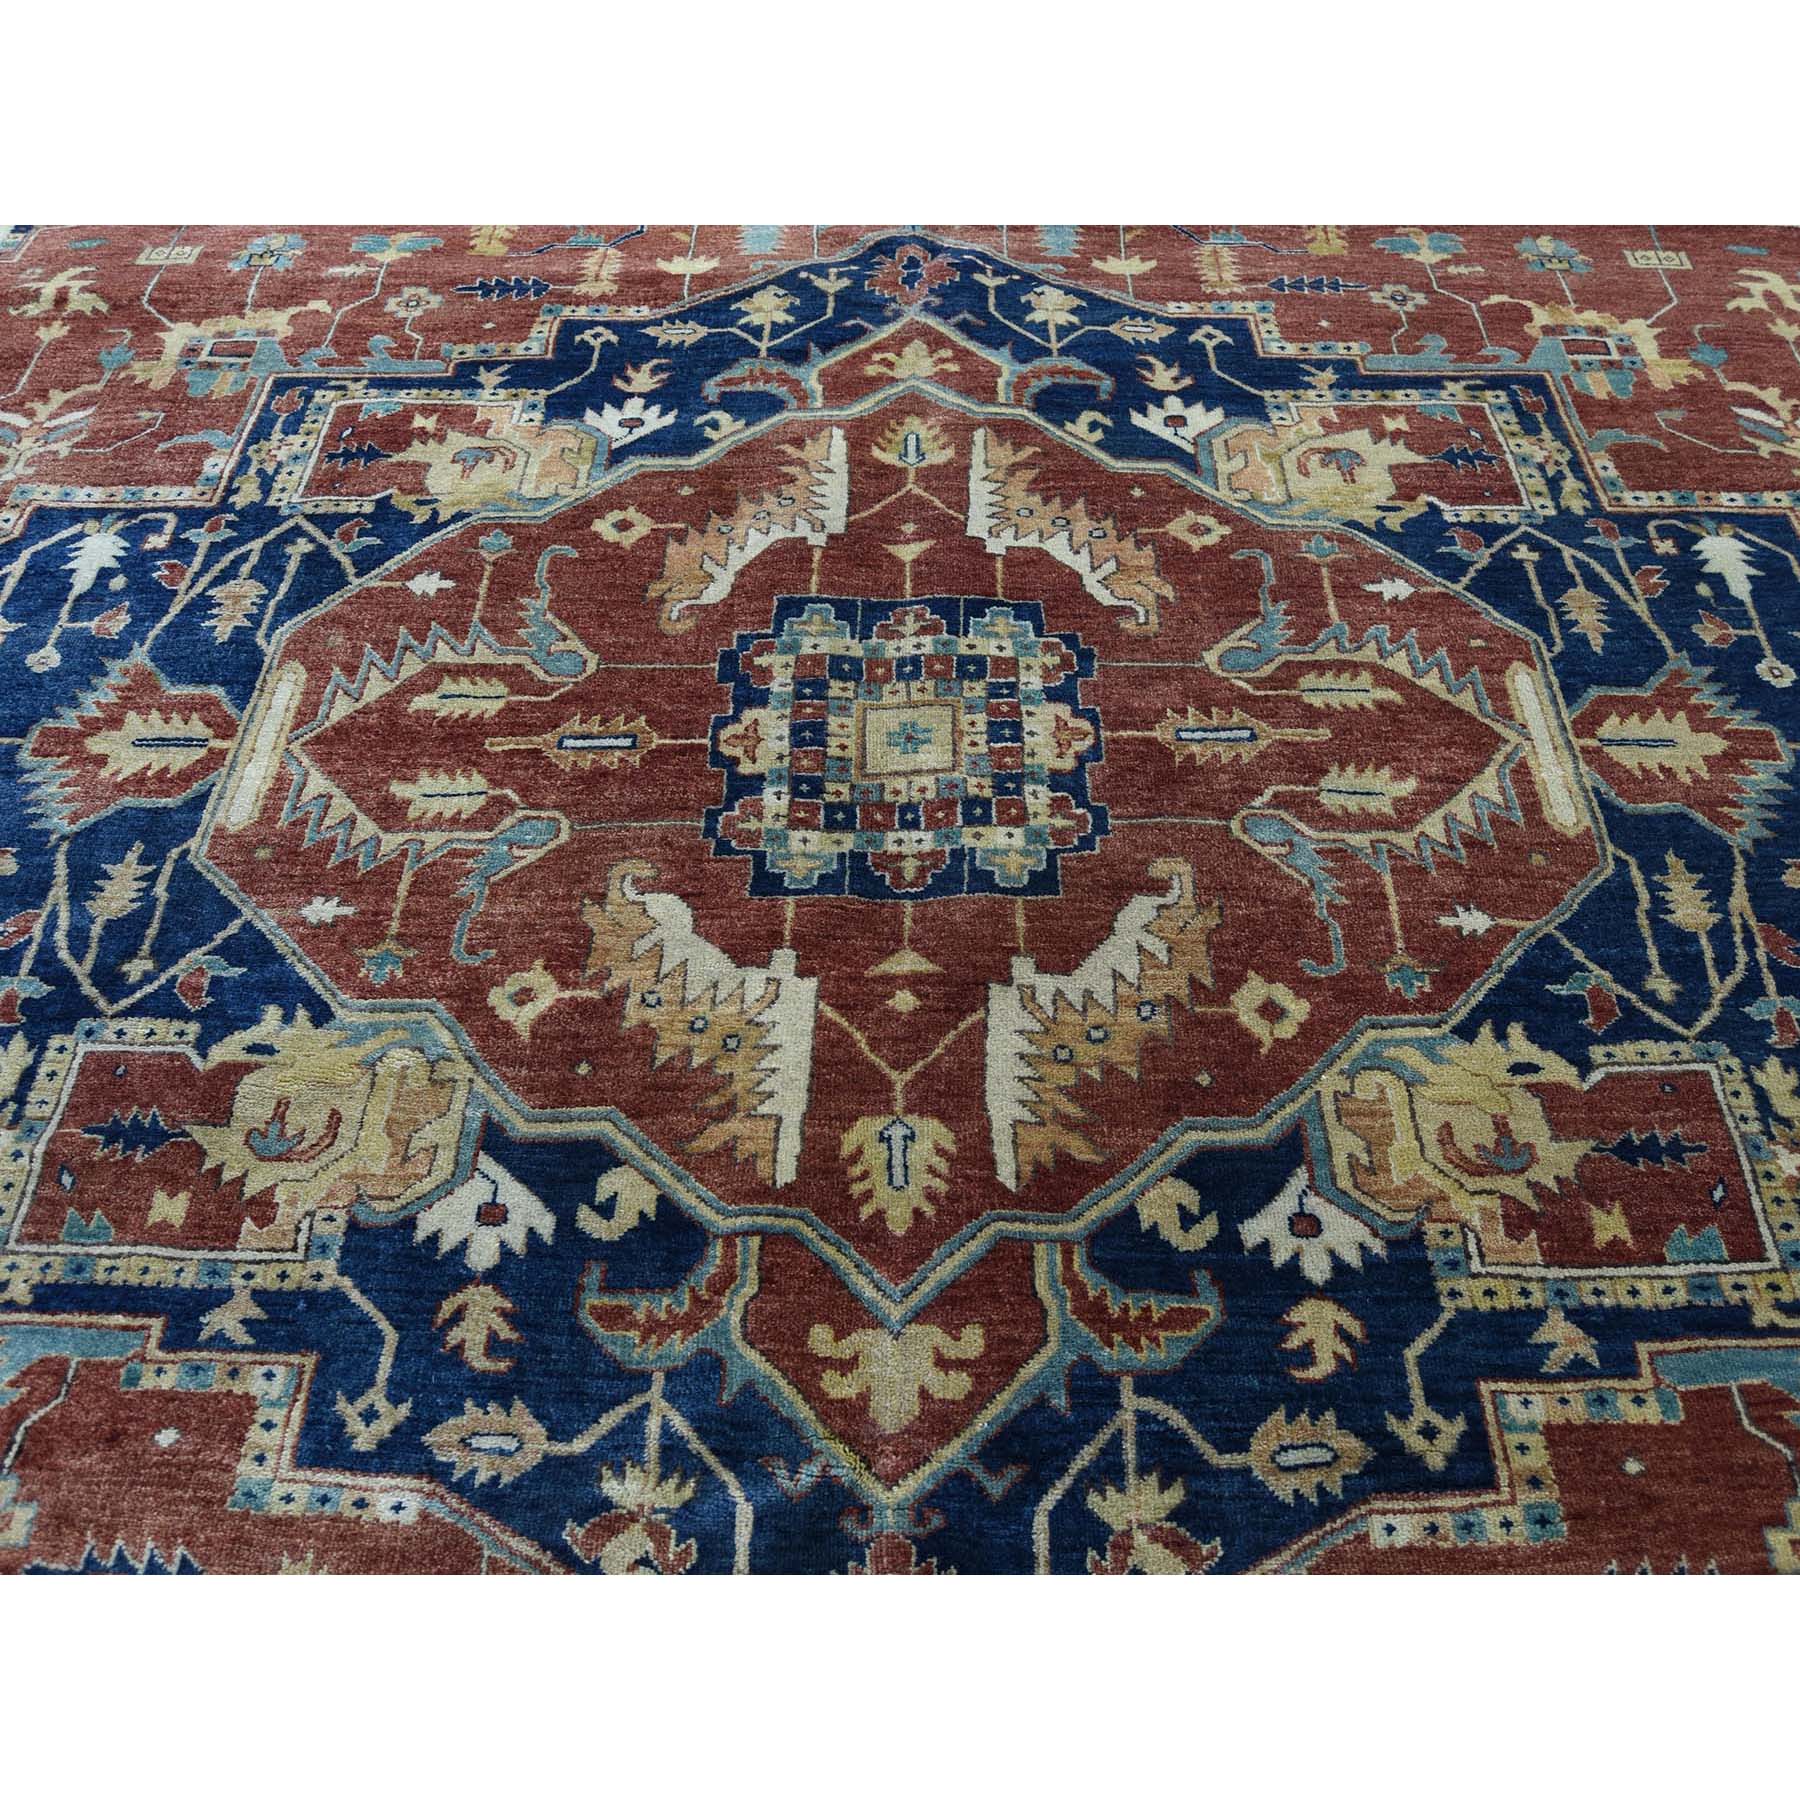 10-1 x13-9  Antiqued Heriz Re-creation Pure Wool Hand Knotted Oriental Rug 